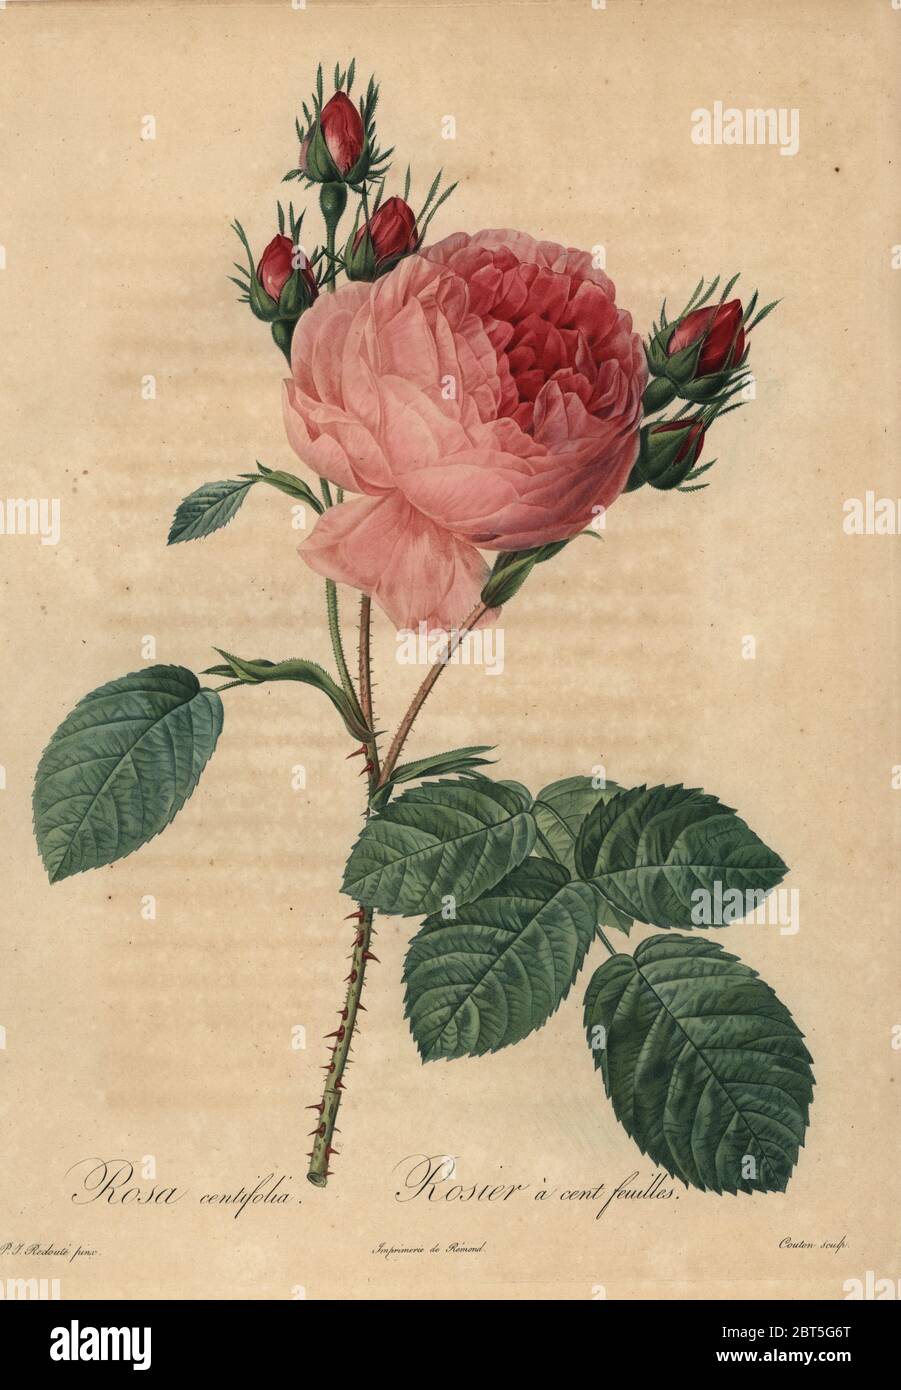 Pink cabbage rose or Provence rose, Rosa centifolia, Rosier a cent feuilles. Stipple copperplate engraving by Couten handcoloured a la poupee after a botanical illustration by Pierre-Joseph Redoute from the first folio edition of Les Roses, Firmin Didot, Paris, 1817. Stock Photo